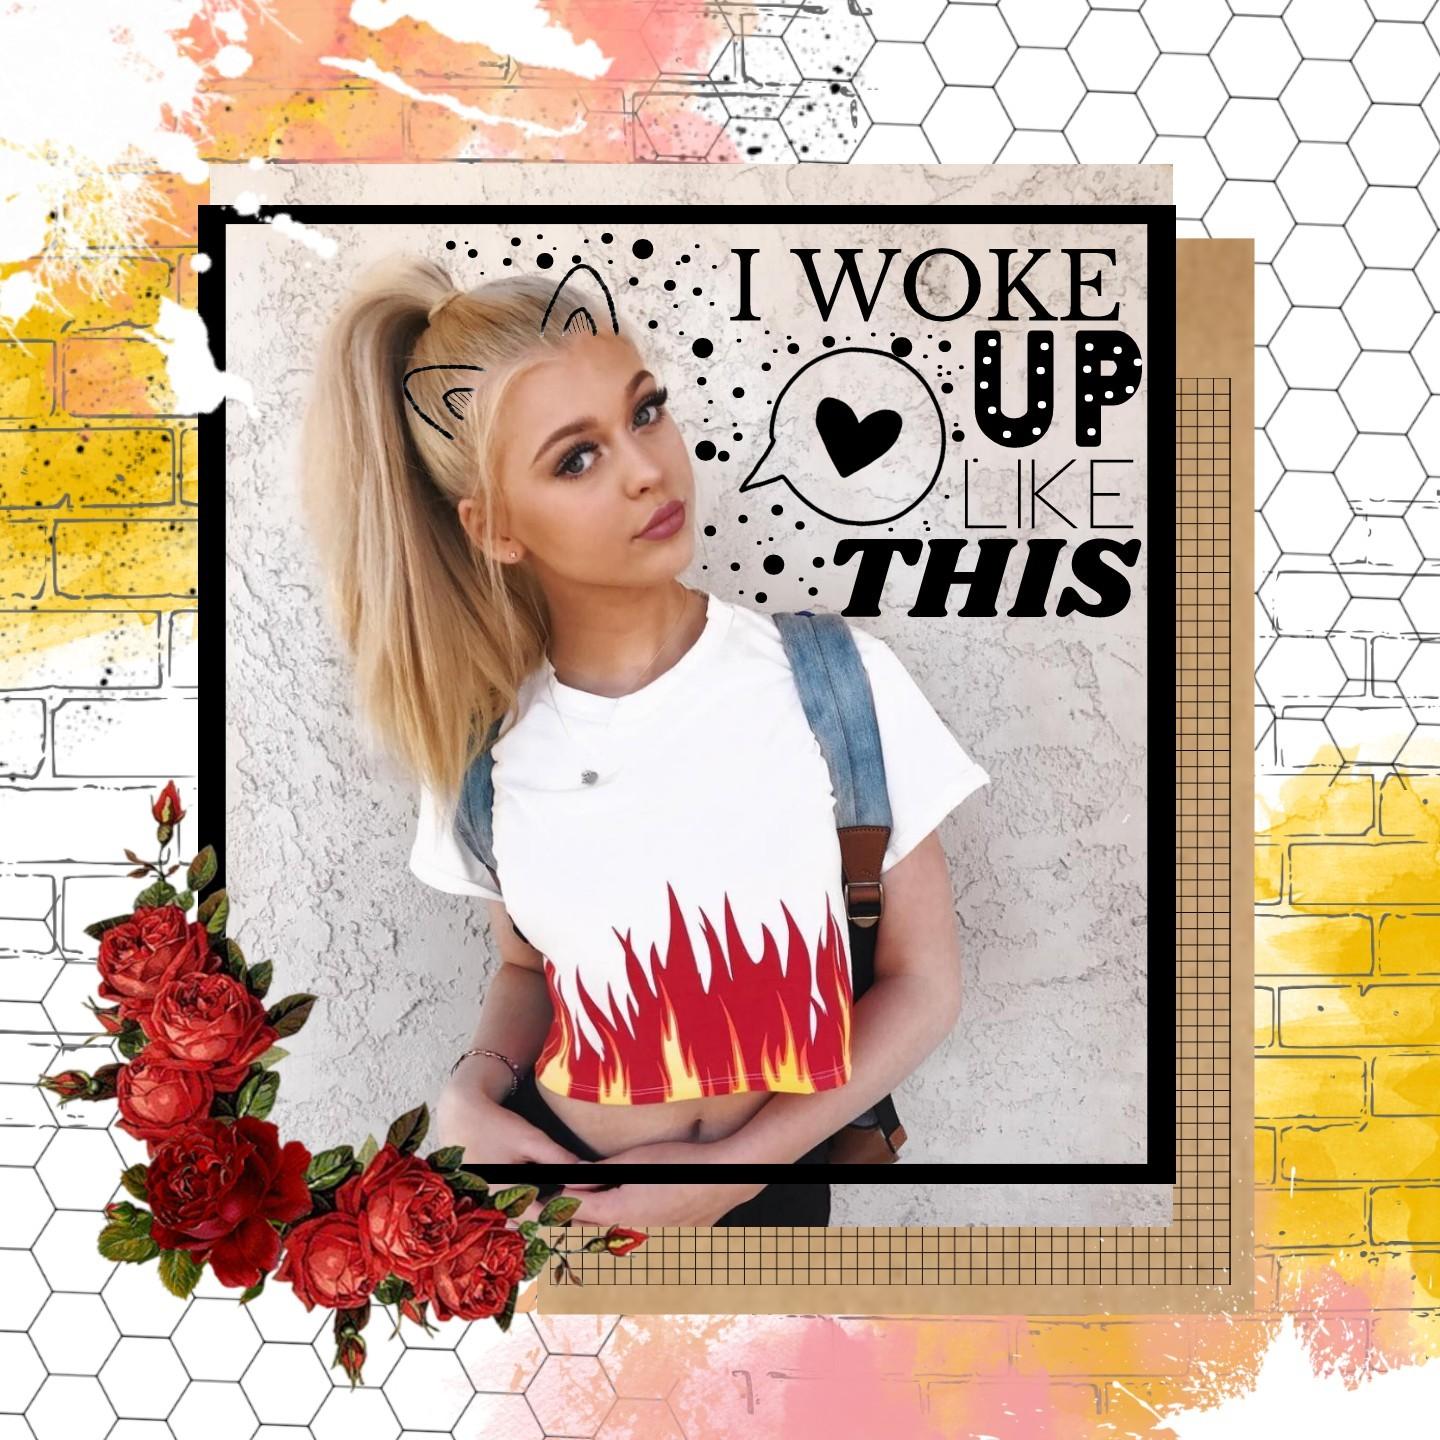 Tappp.....
I made this at school. I'm not really happy with this but want to be active. 
Qotd: Do you know Loren gray?
Aotd: Yess it's the girl of the pic 😂